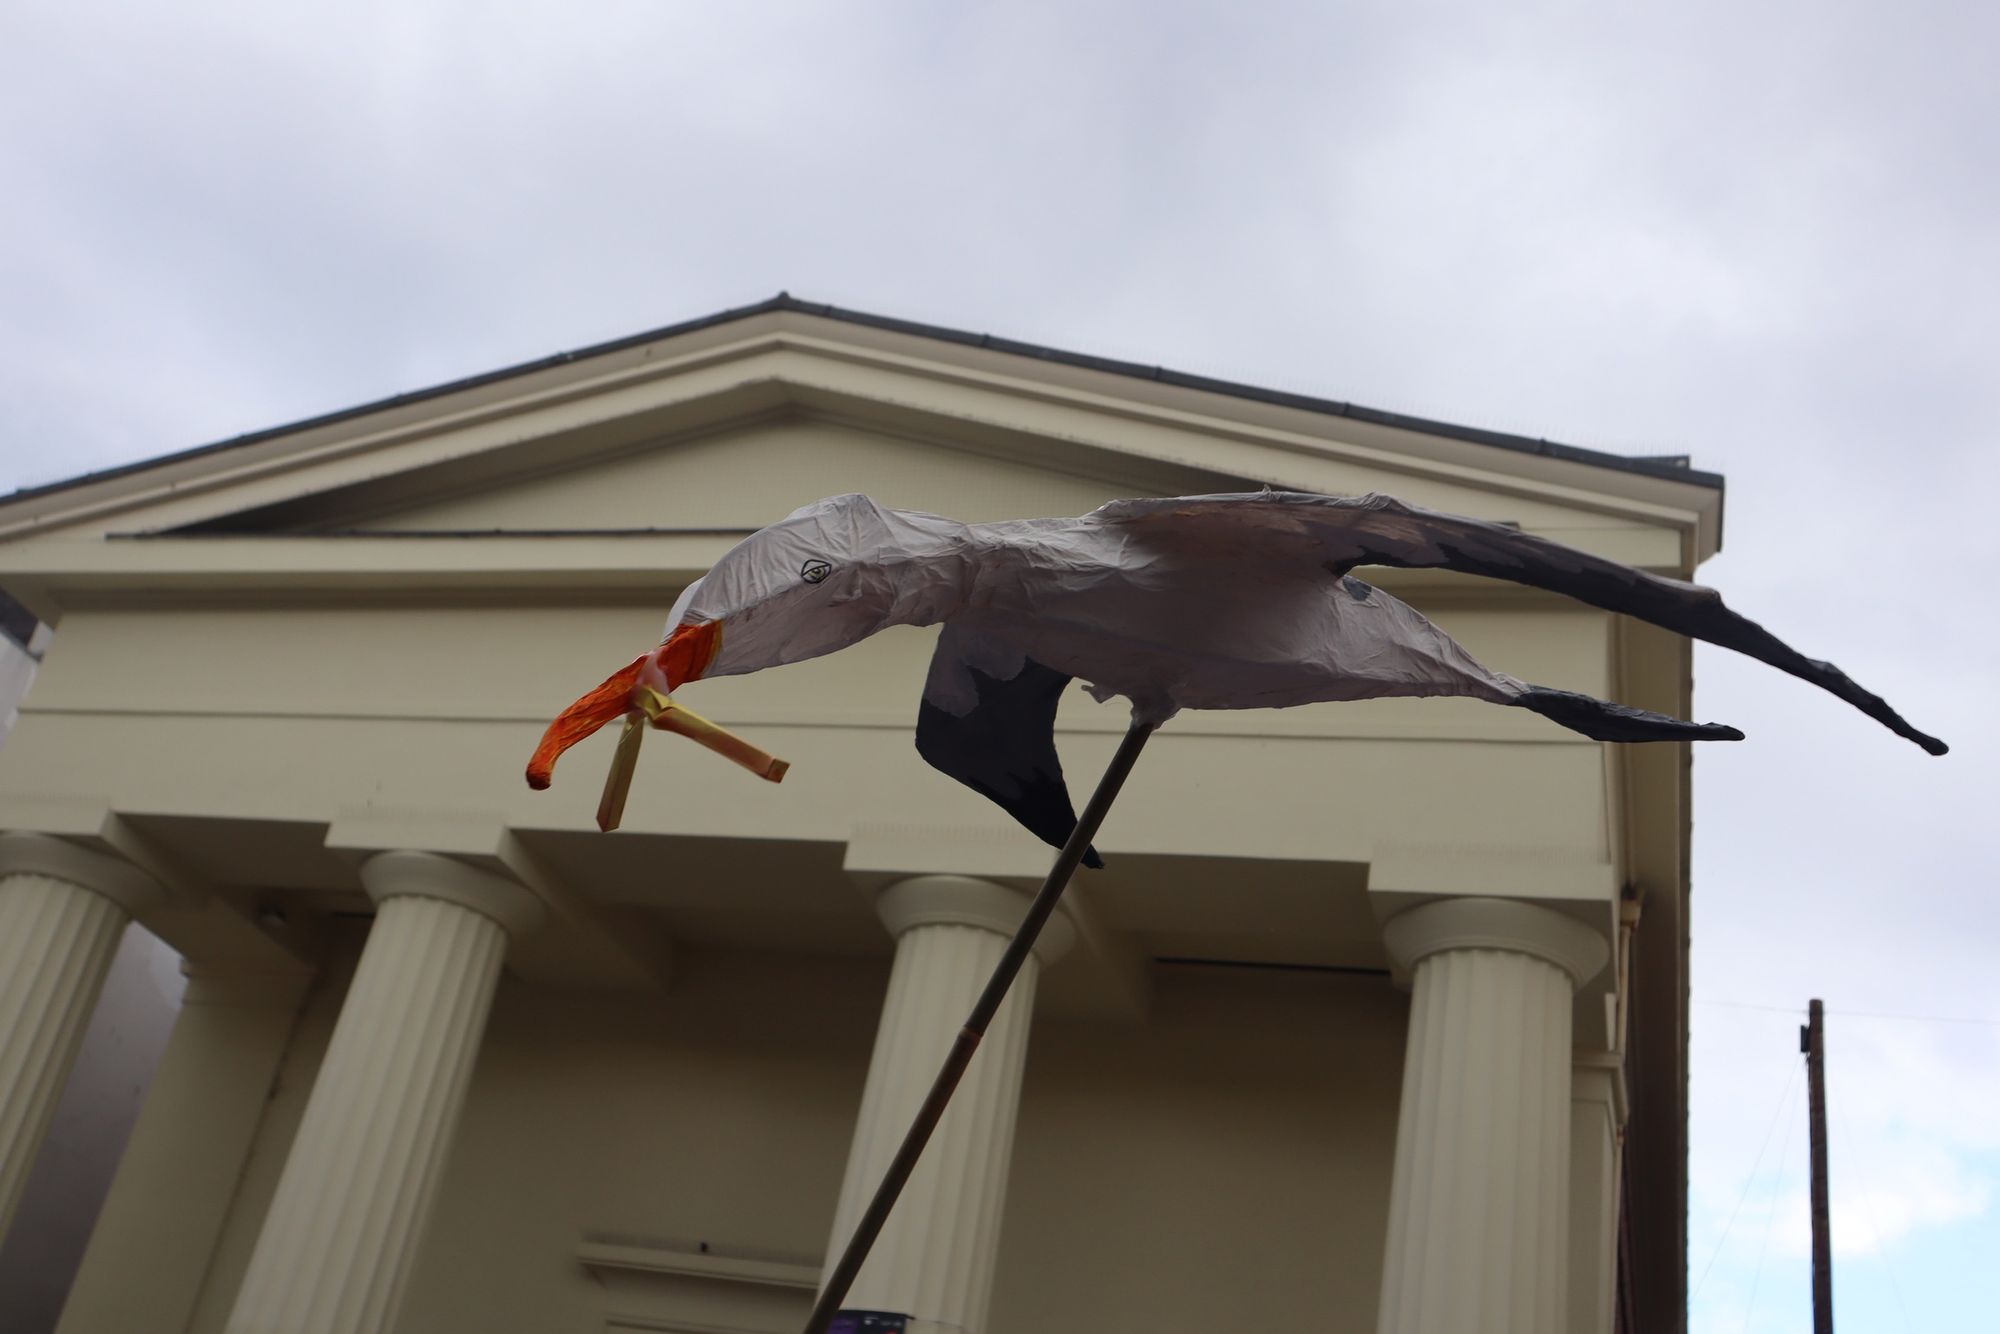 A papier-mâché seagull with a chip in its mouth, from the Children's Parade on Saturday.